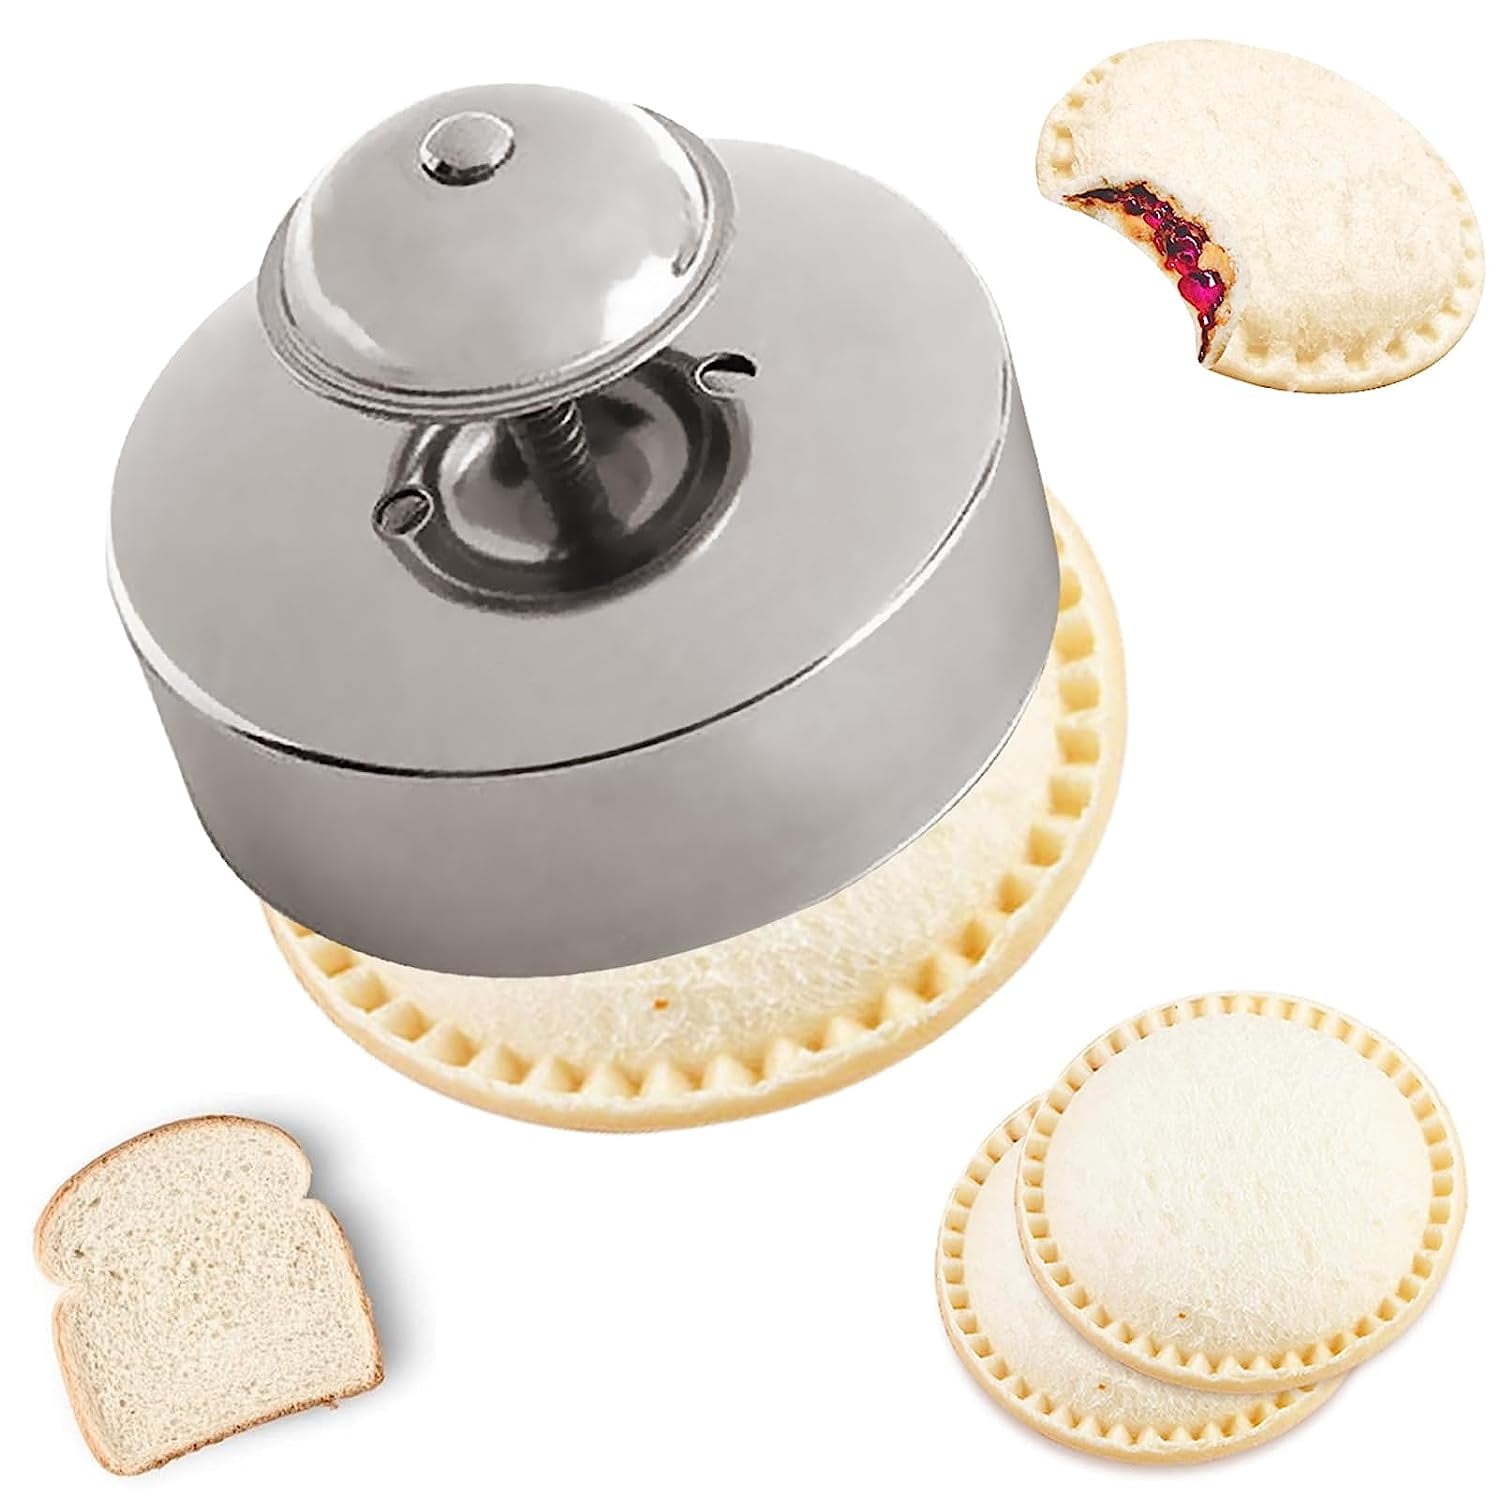 Sandwich Cutter, Sealer and Decruster for Kids - Remove Bread Crust, Make DIY Pocket Sandwiches - Non Toxic, BPA Free, Food Grade Mold - Durable, Port